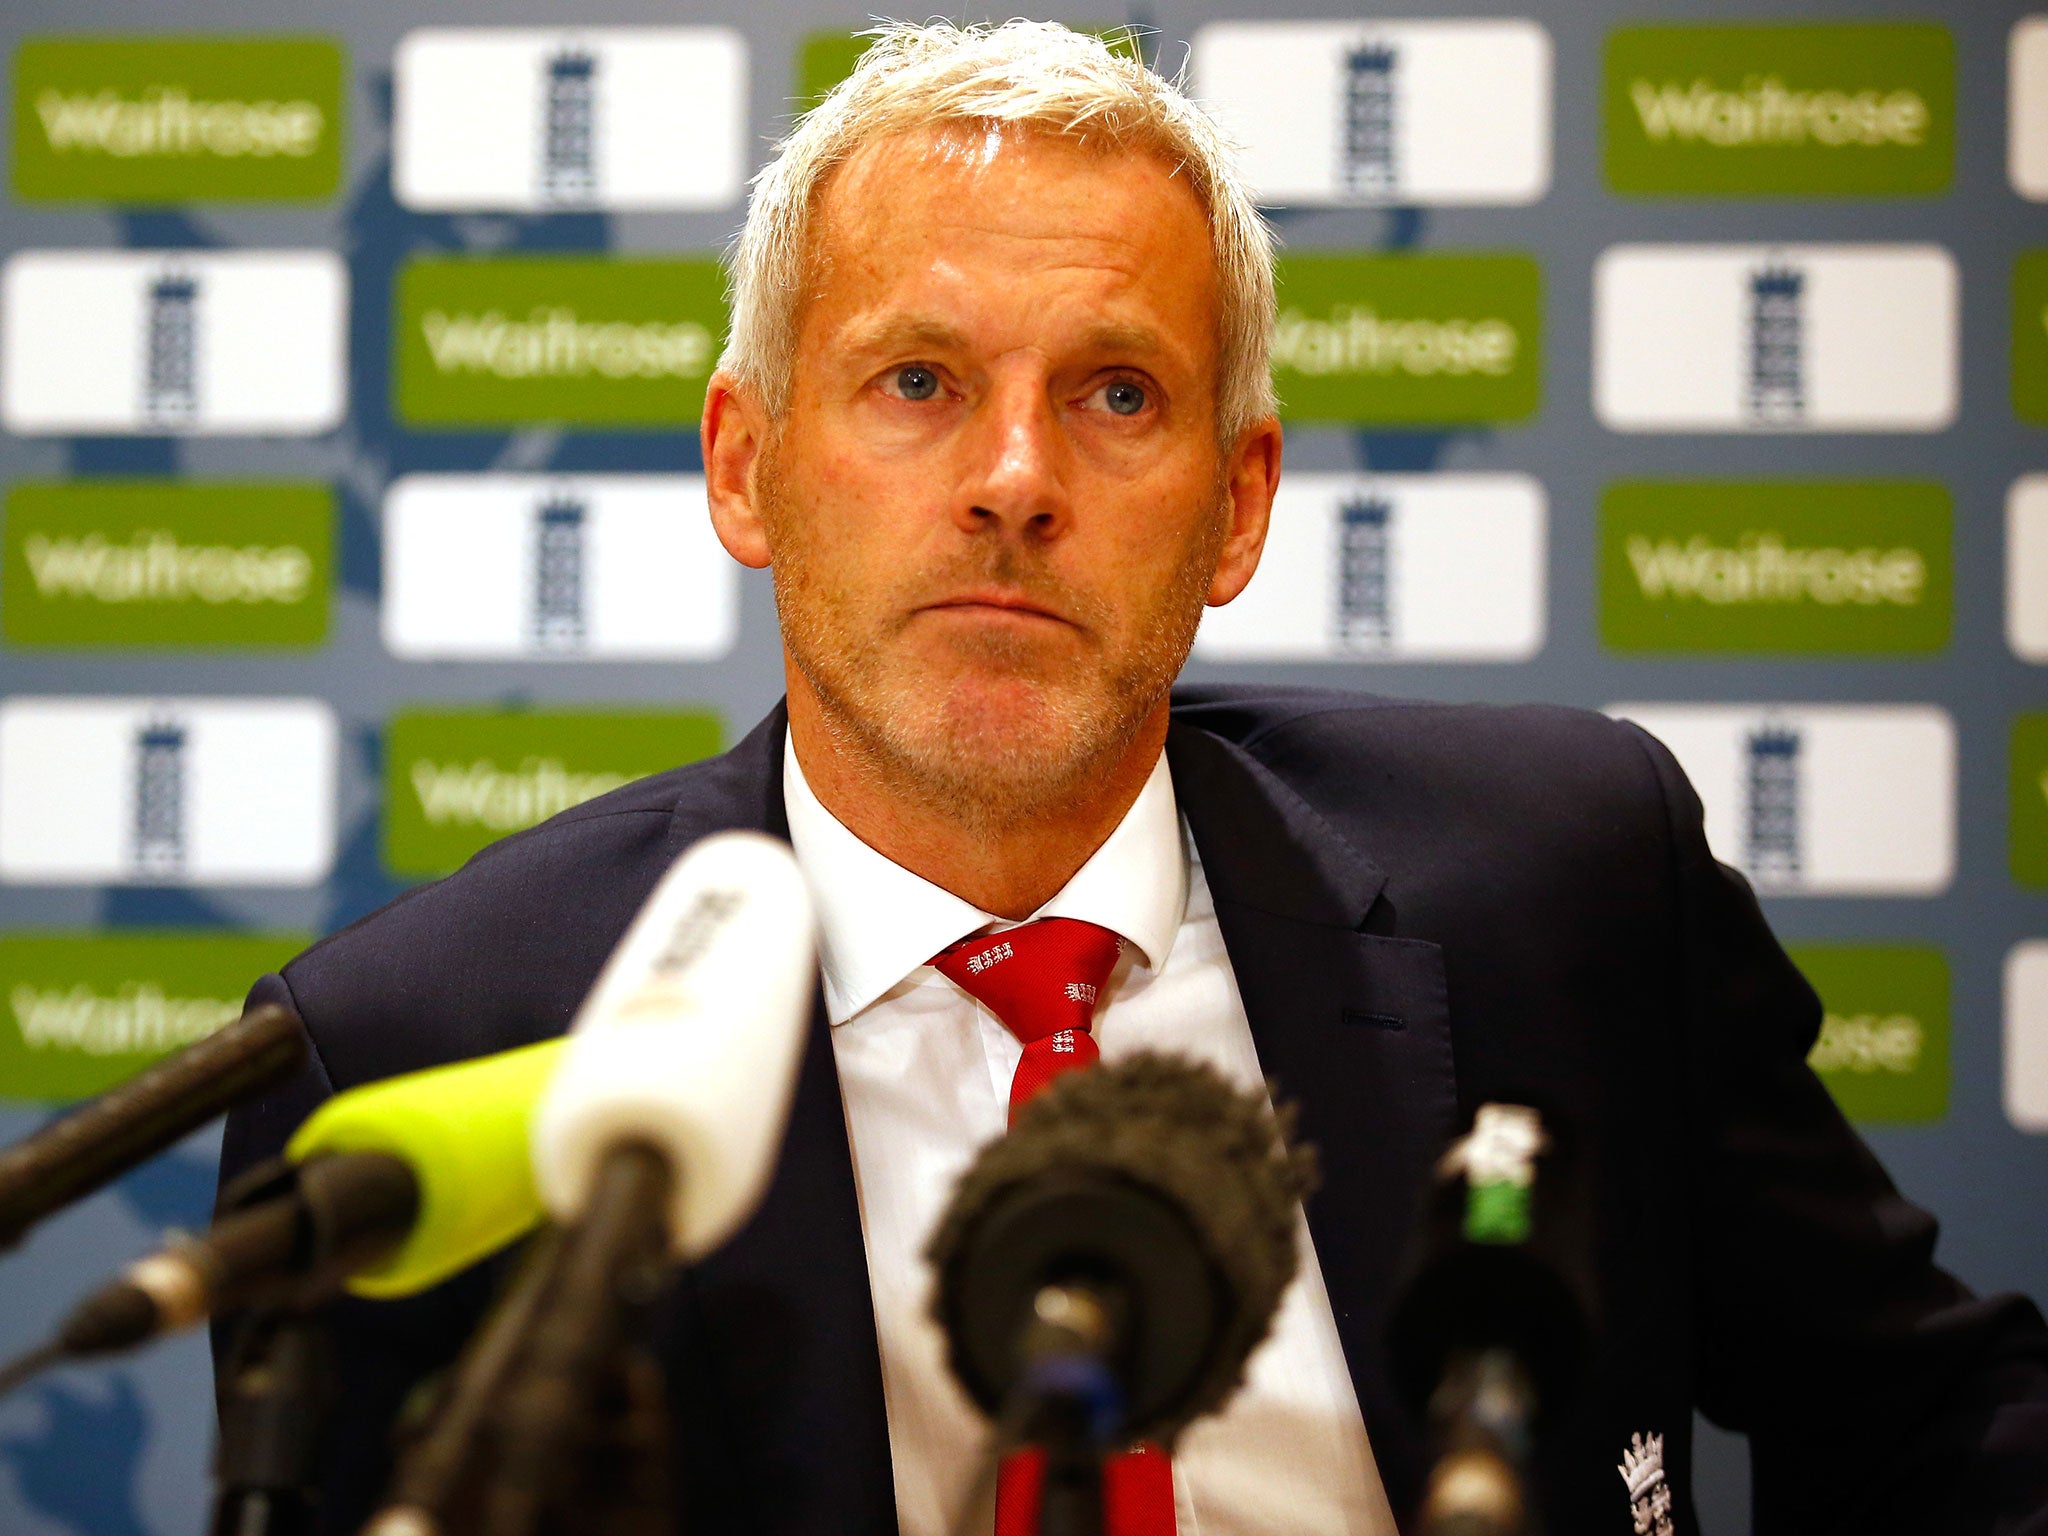 Peter Moores said sacking Cook "felt like the right thing to do"